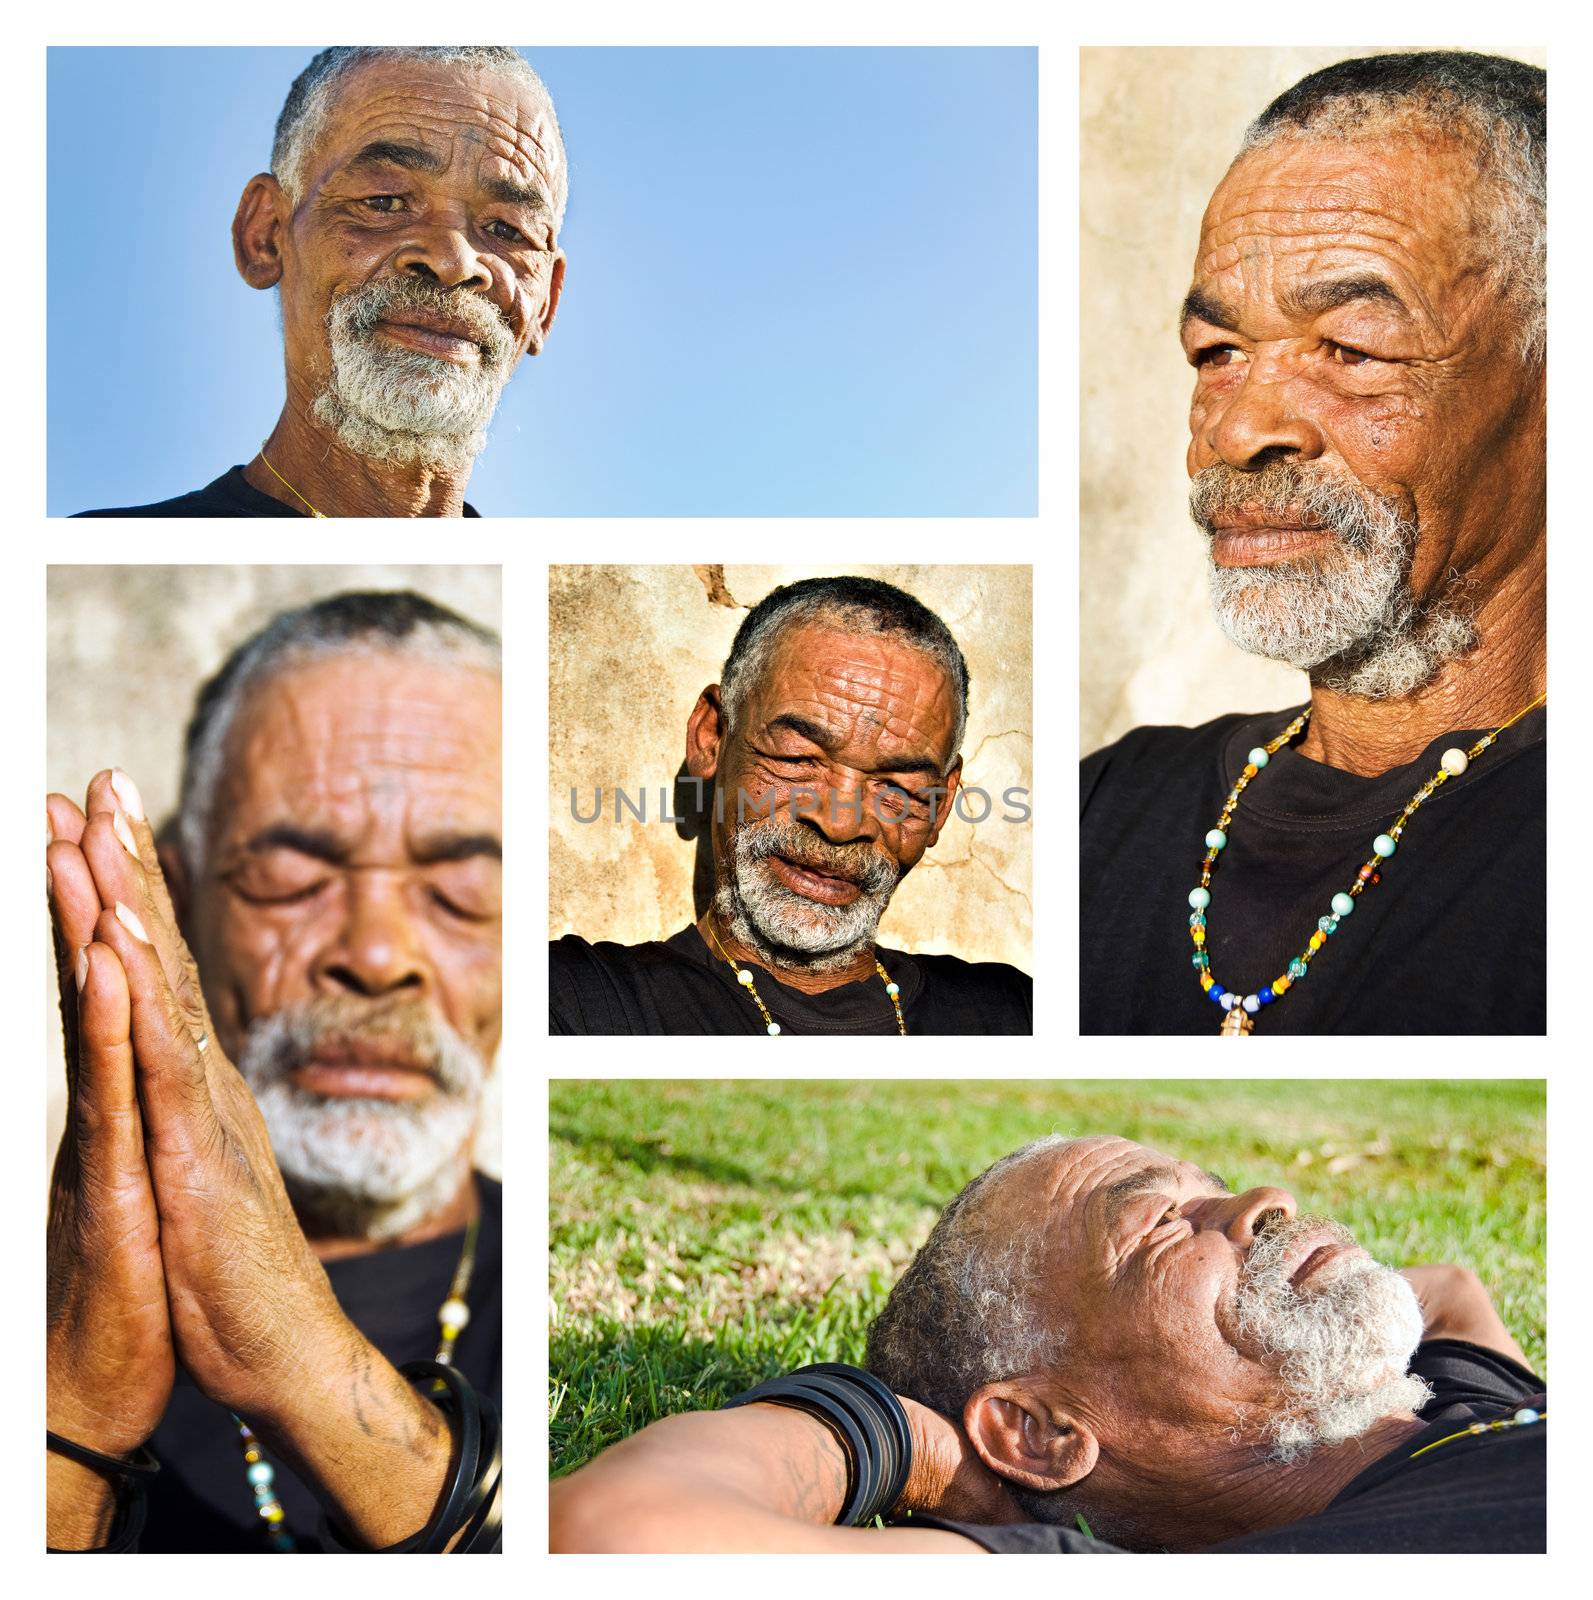 Senior African man - collage with different portraits.